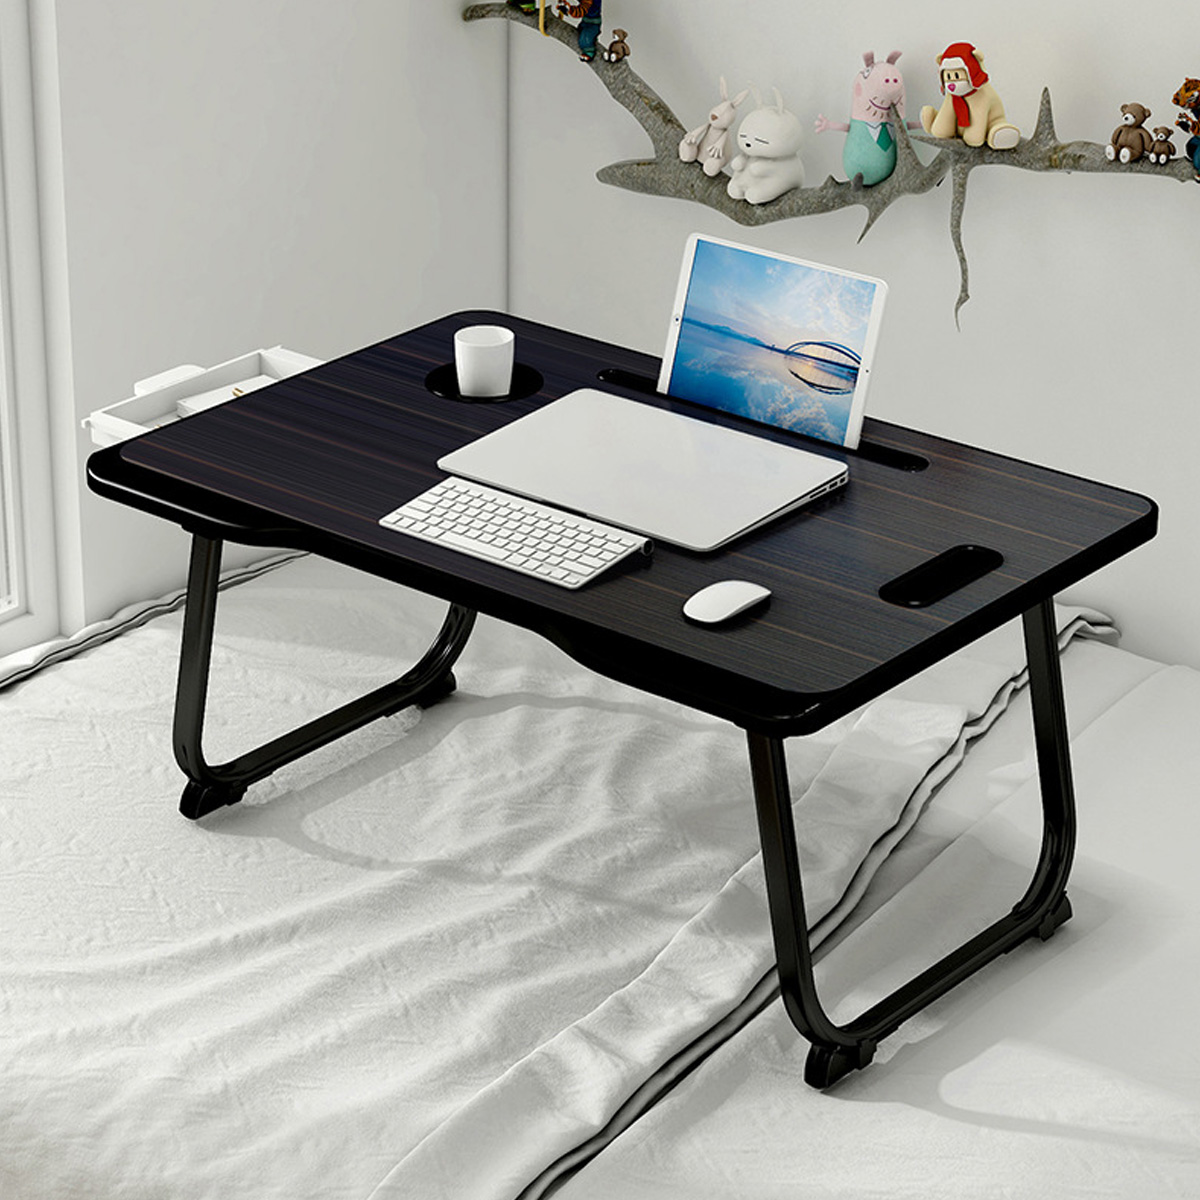 Folding-Laptop-Table-Desk-Notebook-Learning-Writing-Desk-with-Small-Drawer-Cup-Slot-Lap-Desk-Bed-for-1761880-10